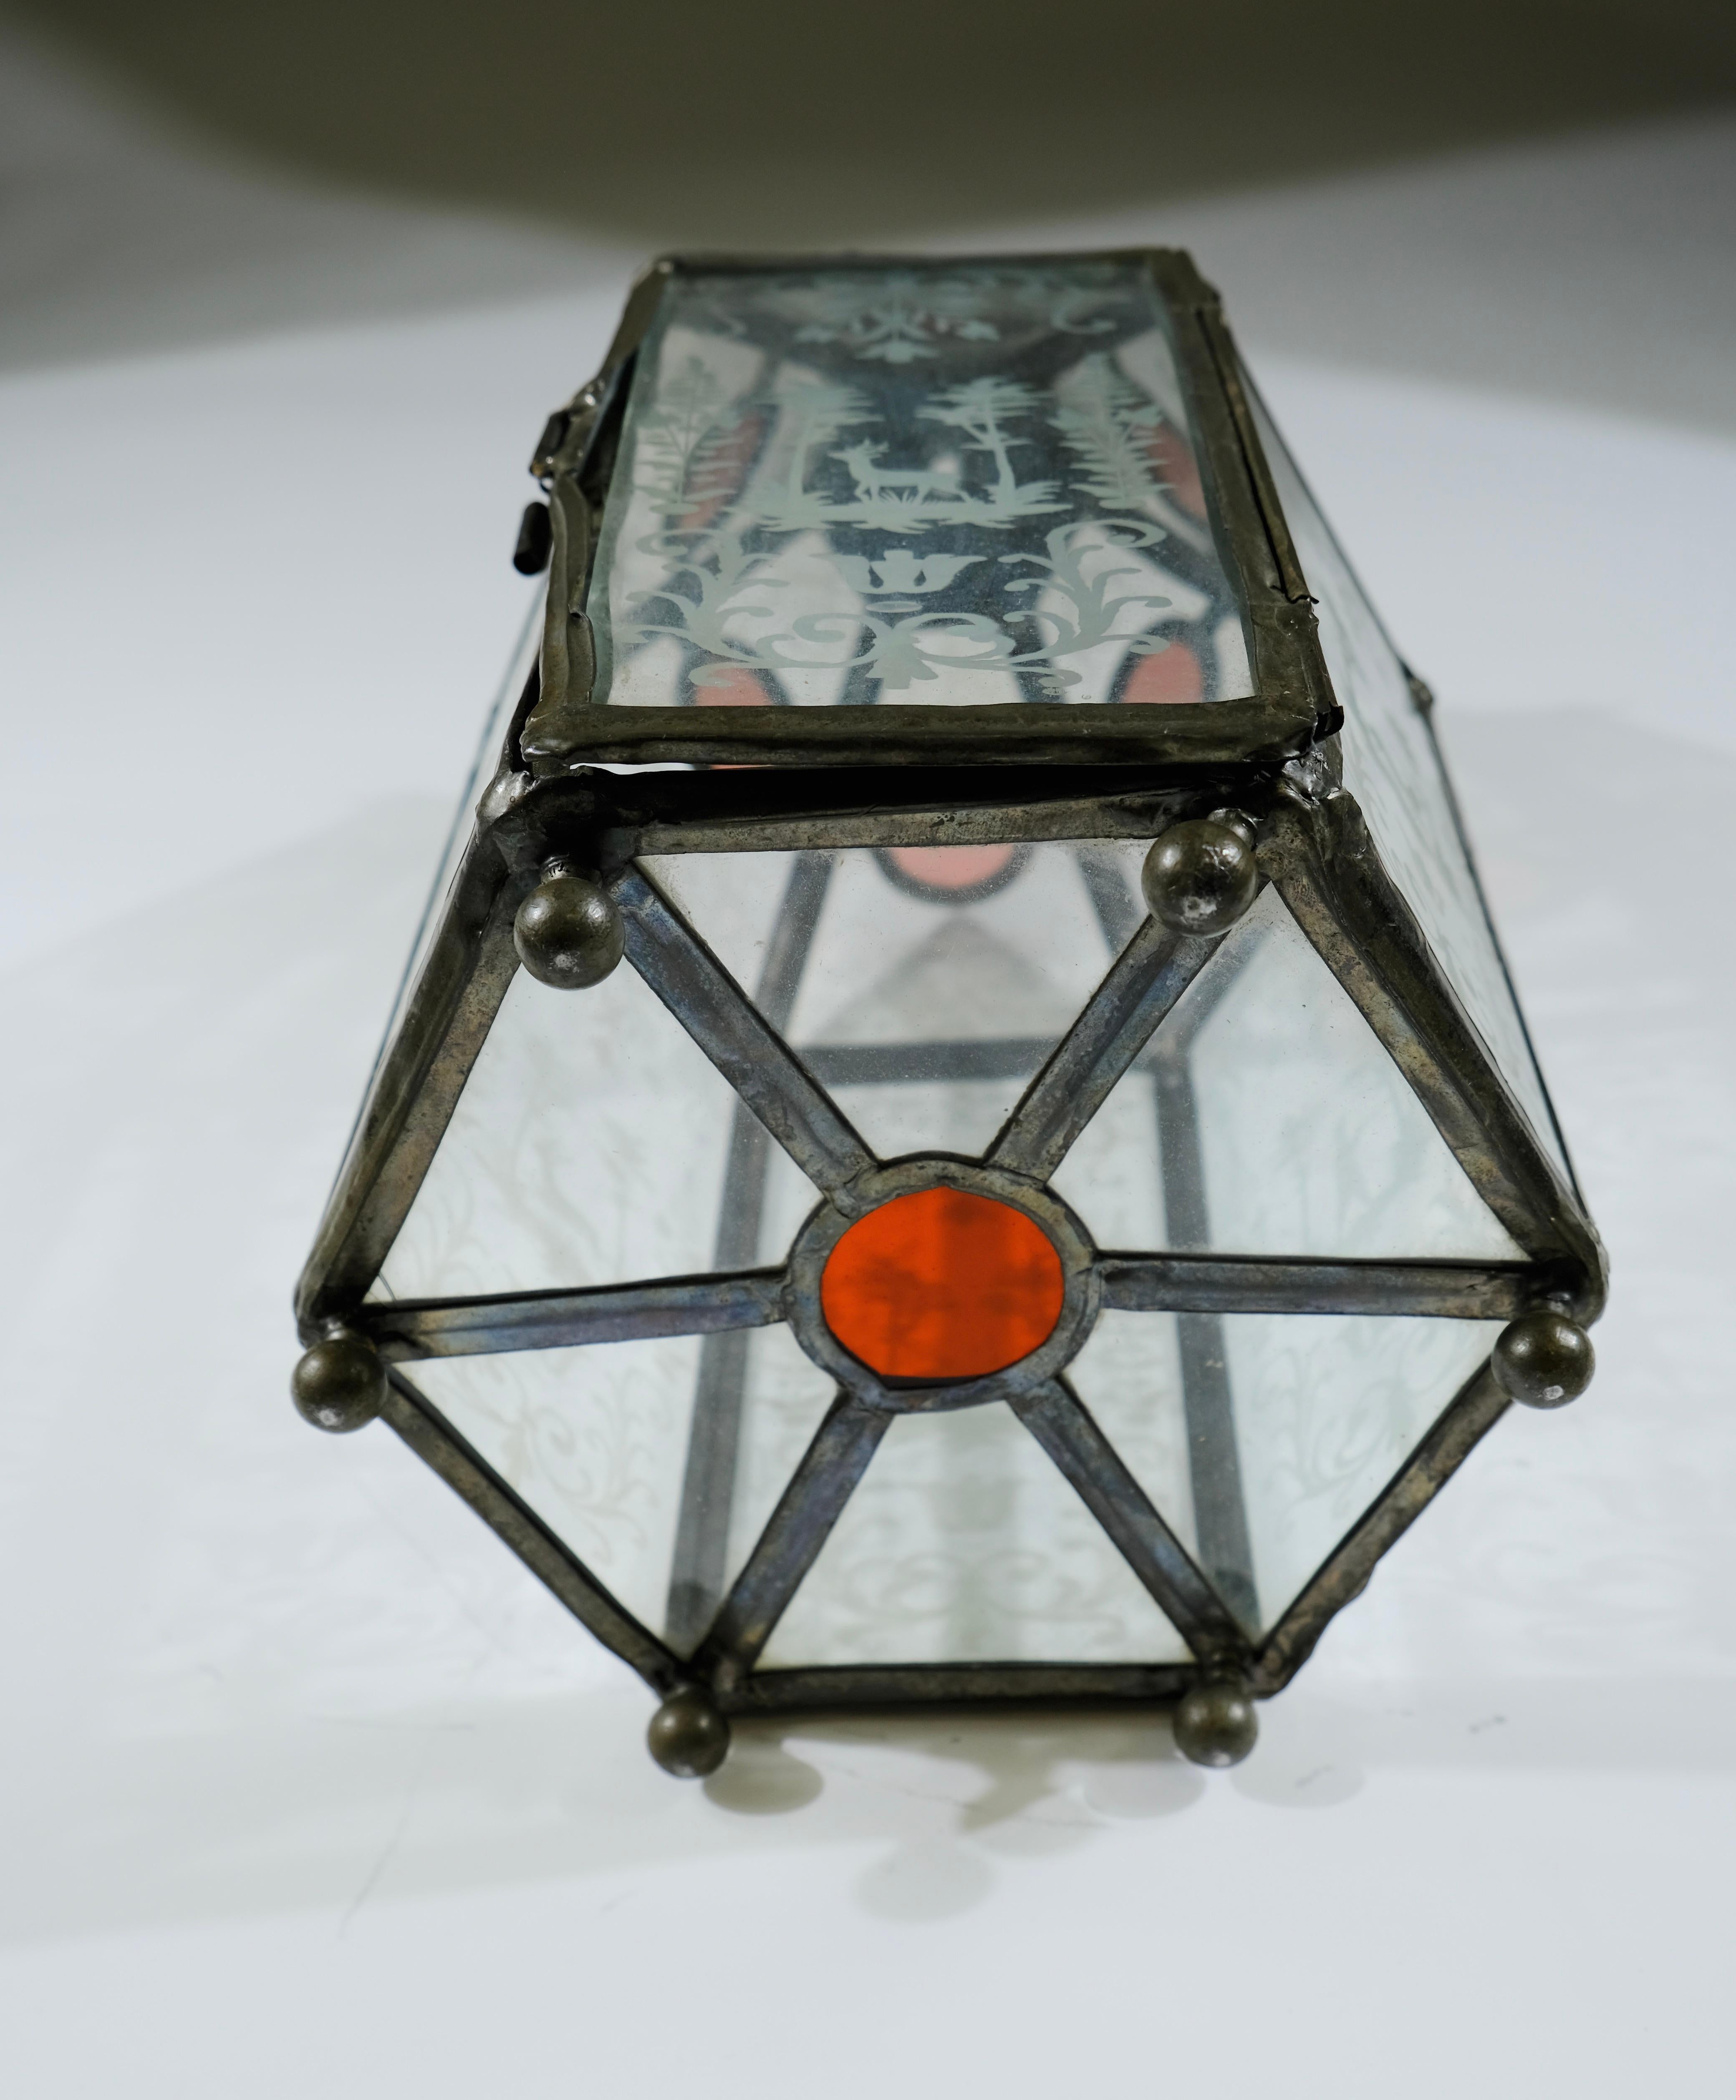 Antique lantern with engraved glass plates, 19th c.  1